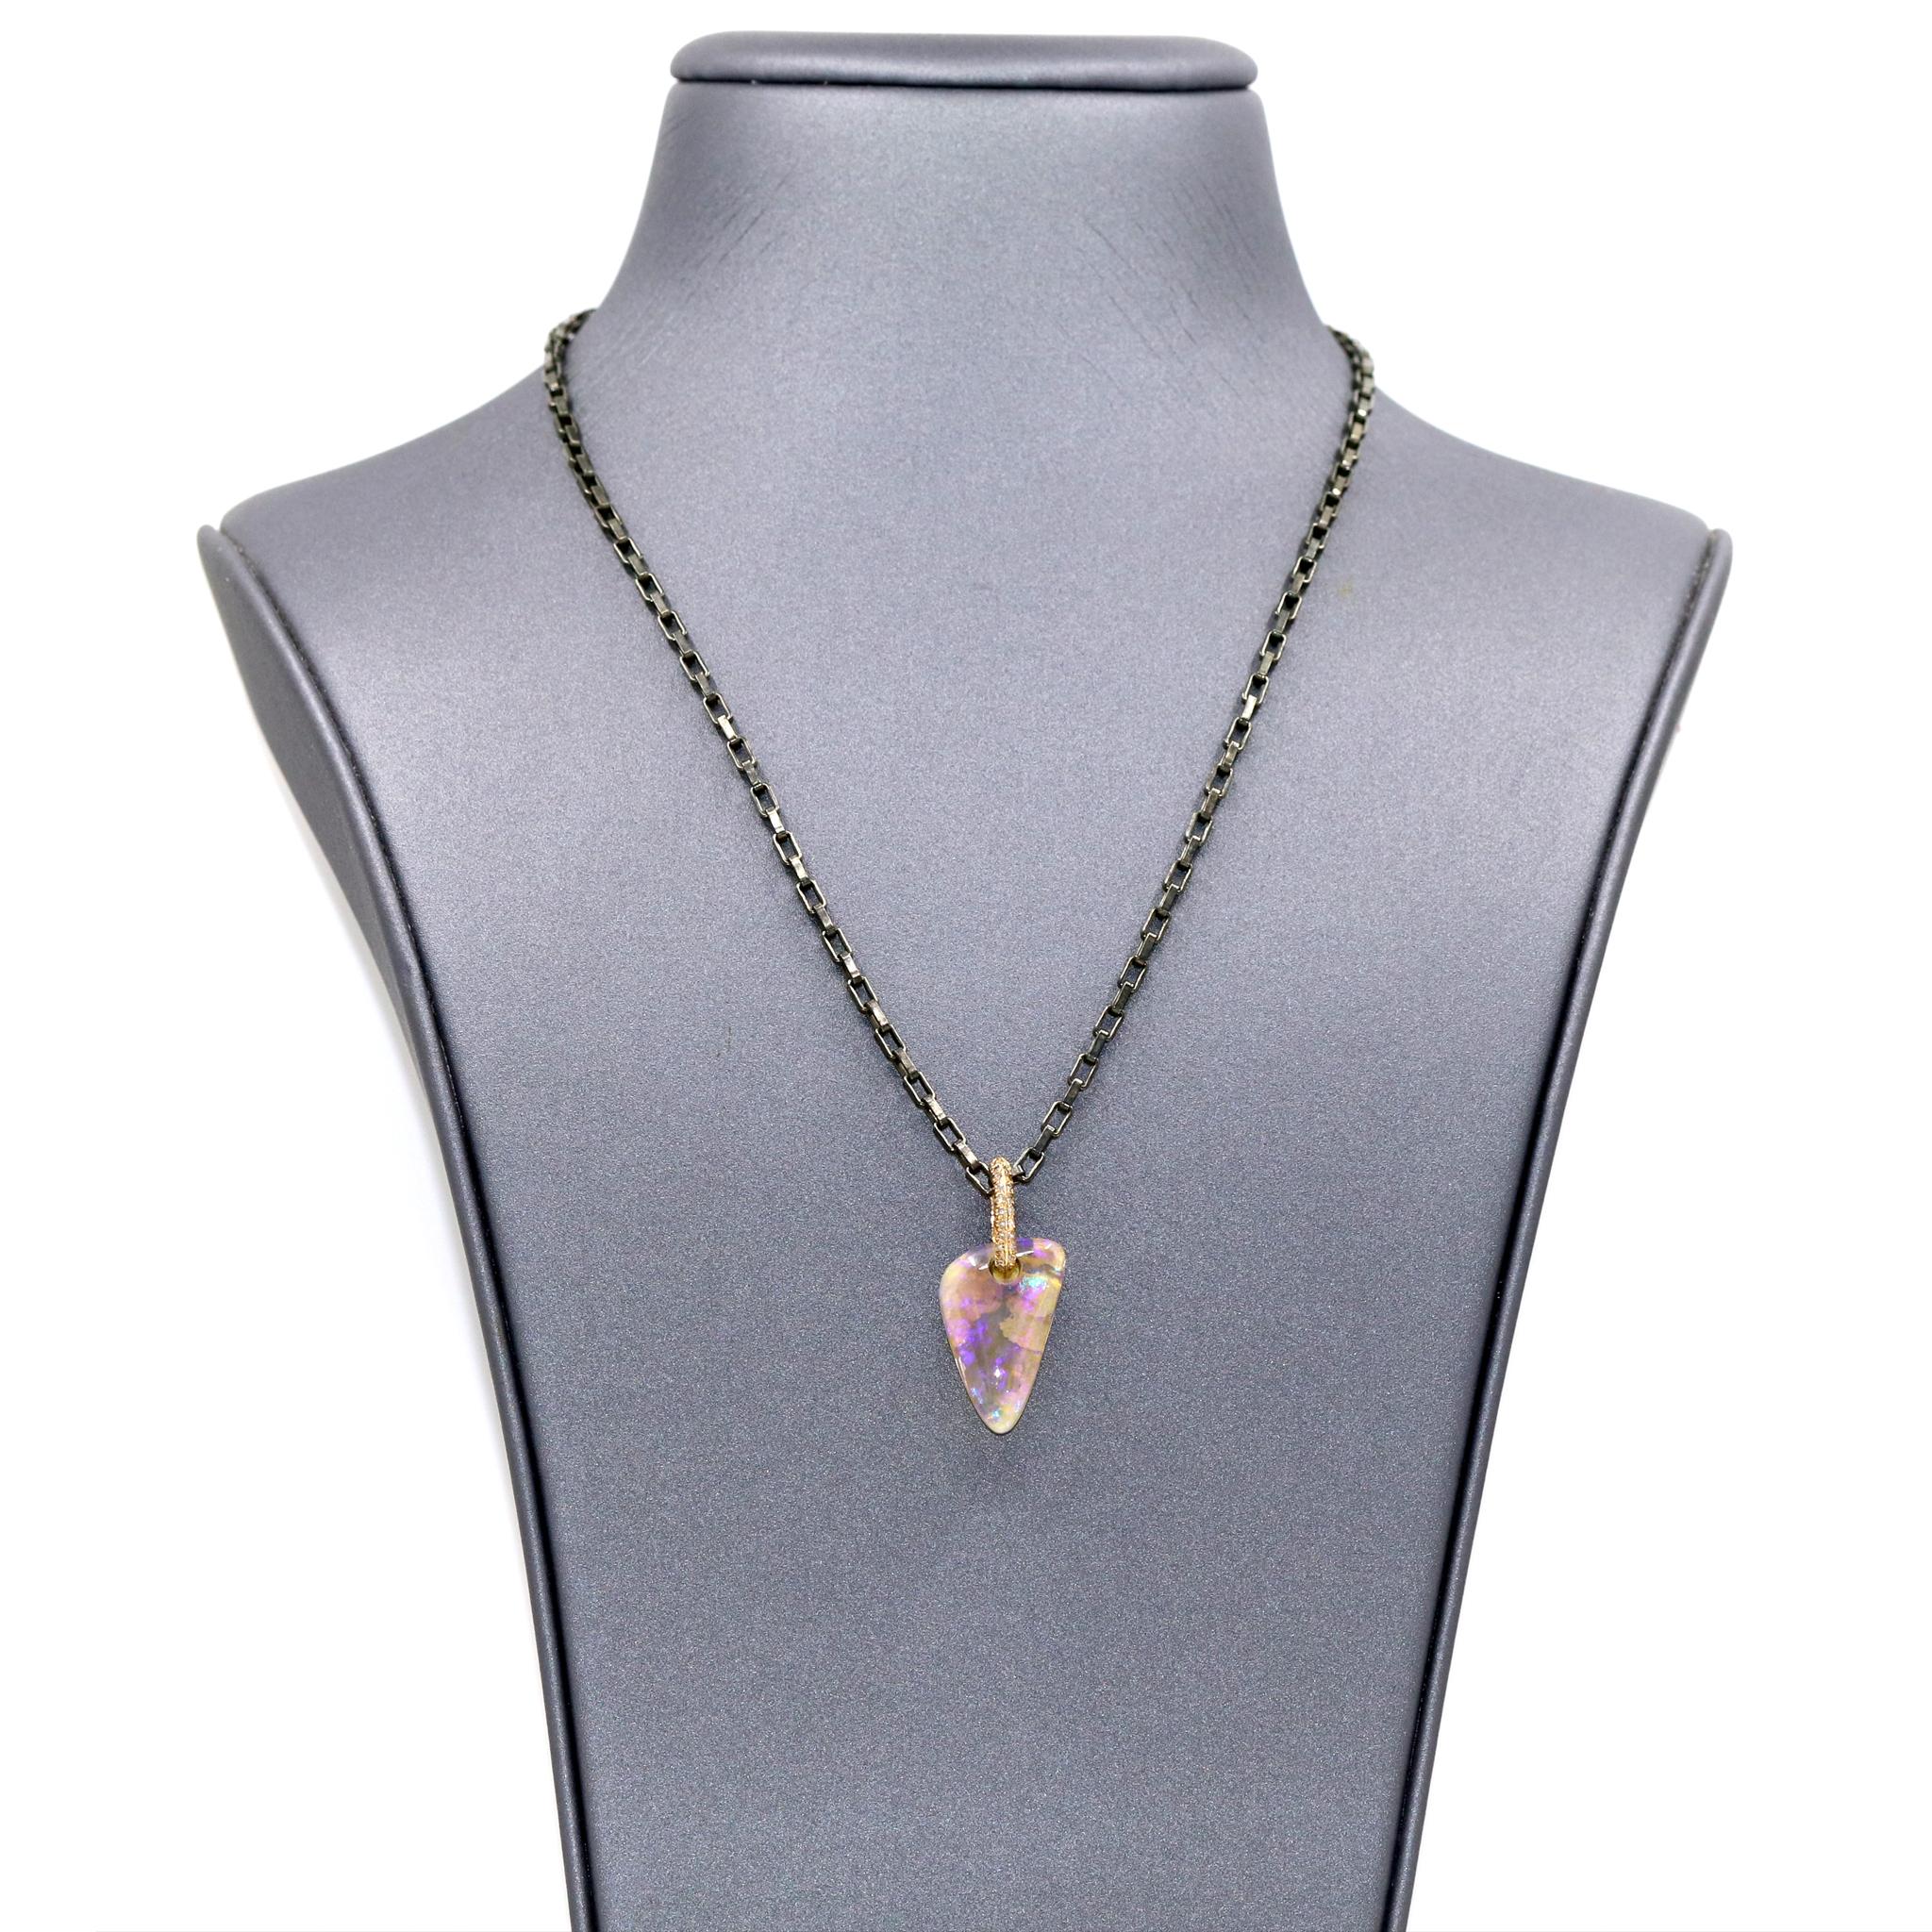 One of a Kind Floating Opal Necklace handmade by jewelry designer Julie Romanenko featuring an extraordinary and distinctive Australian crystal opal with vibrant violet, blue, and green flash. The phenomenal gem is attached to a diamond-embedded 14k